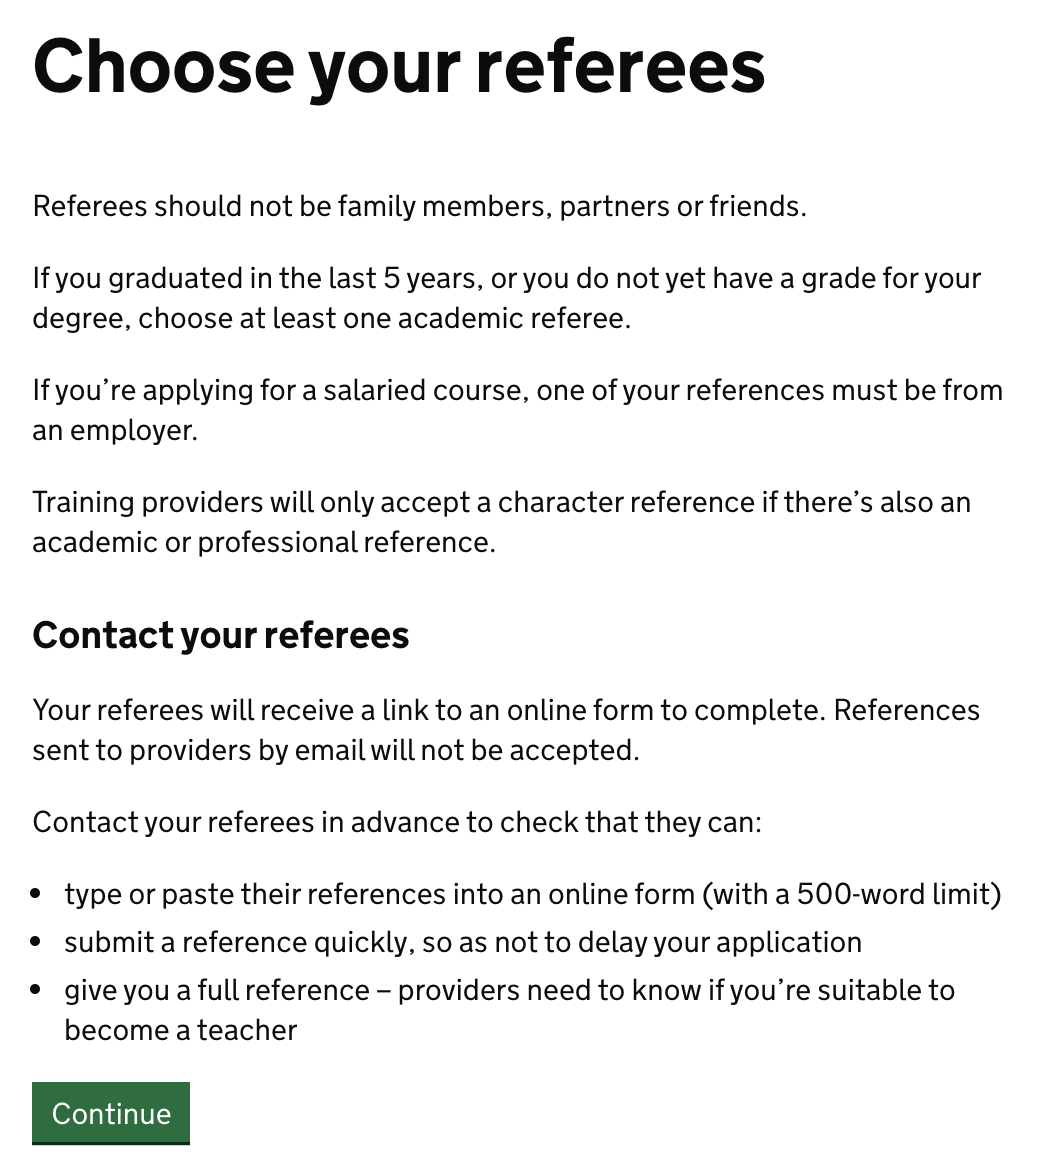 Screenshot of ‘Choose your referees’ page.